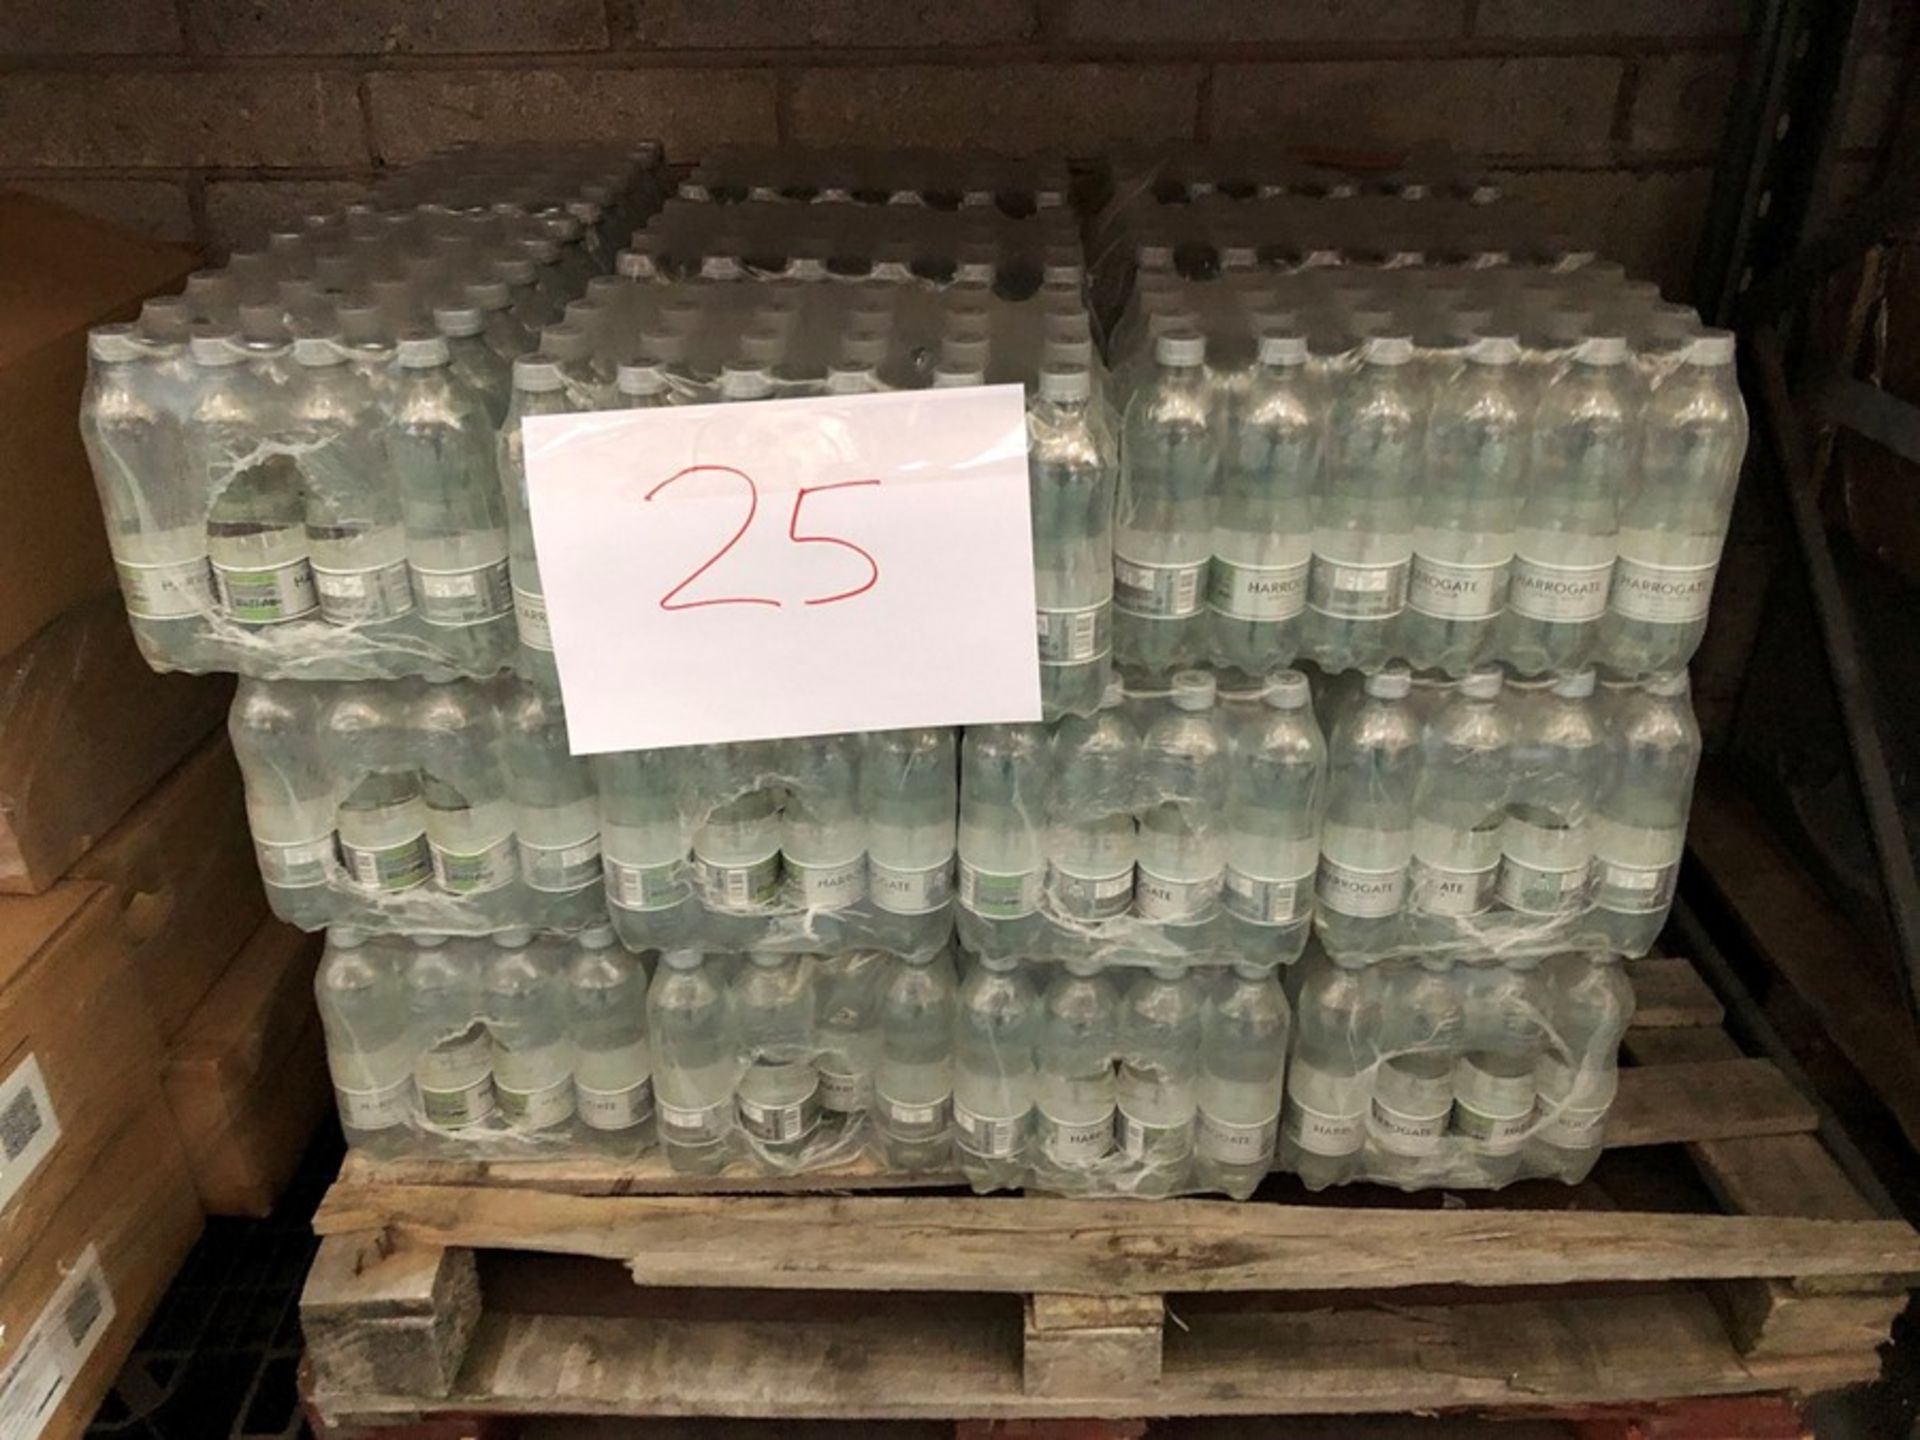 1 LOT TO CONTAIN 24 PACKS OF HARROGATE SPRING SPARKLING WATER - 24 X 500ML PER PACK / BEST BEFORE: